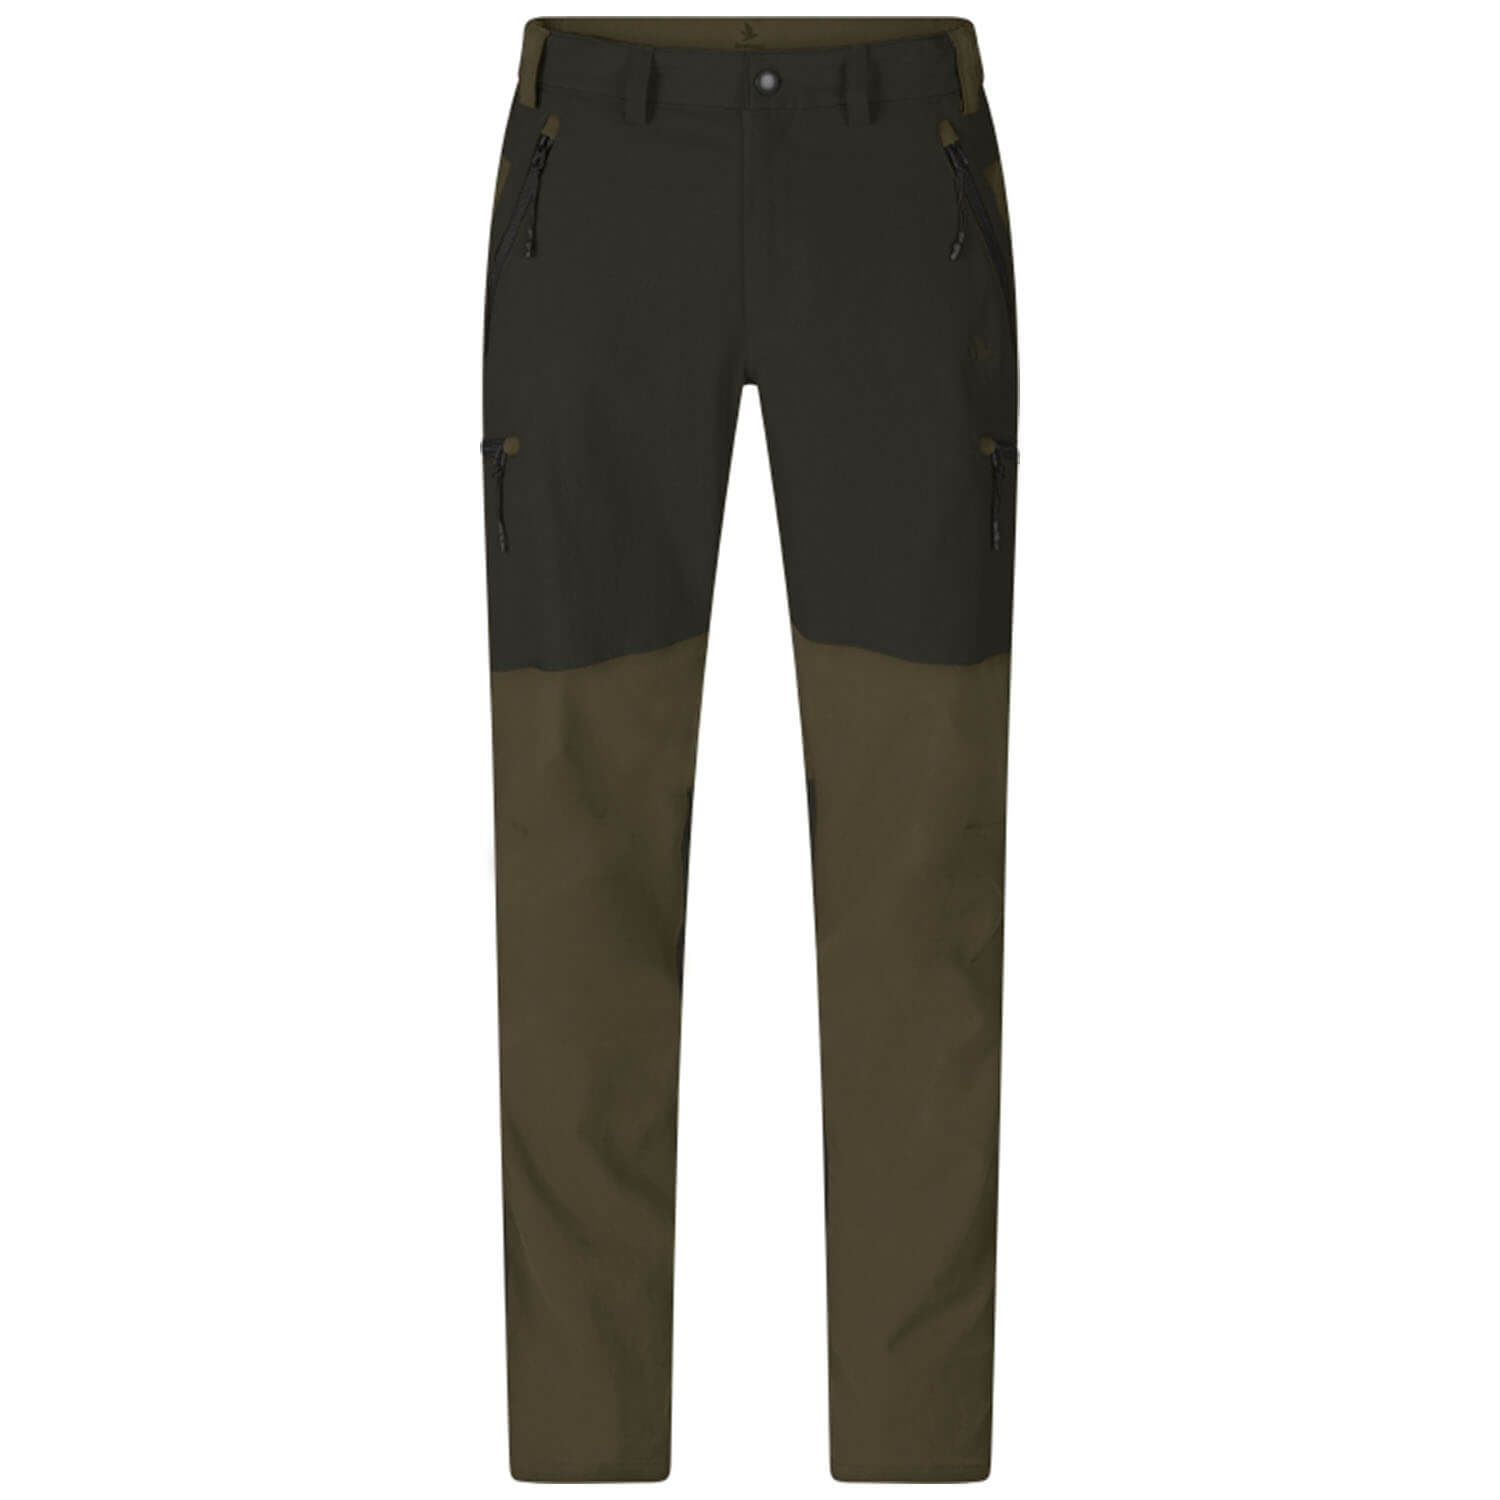 Seeland hunting pants outdoor stretch (grizzly brown)